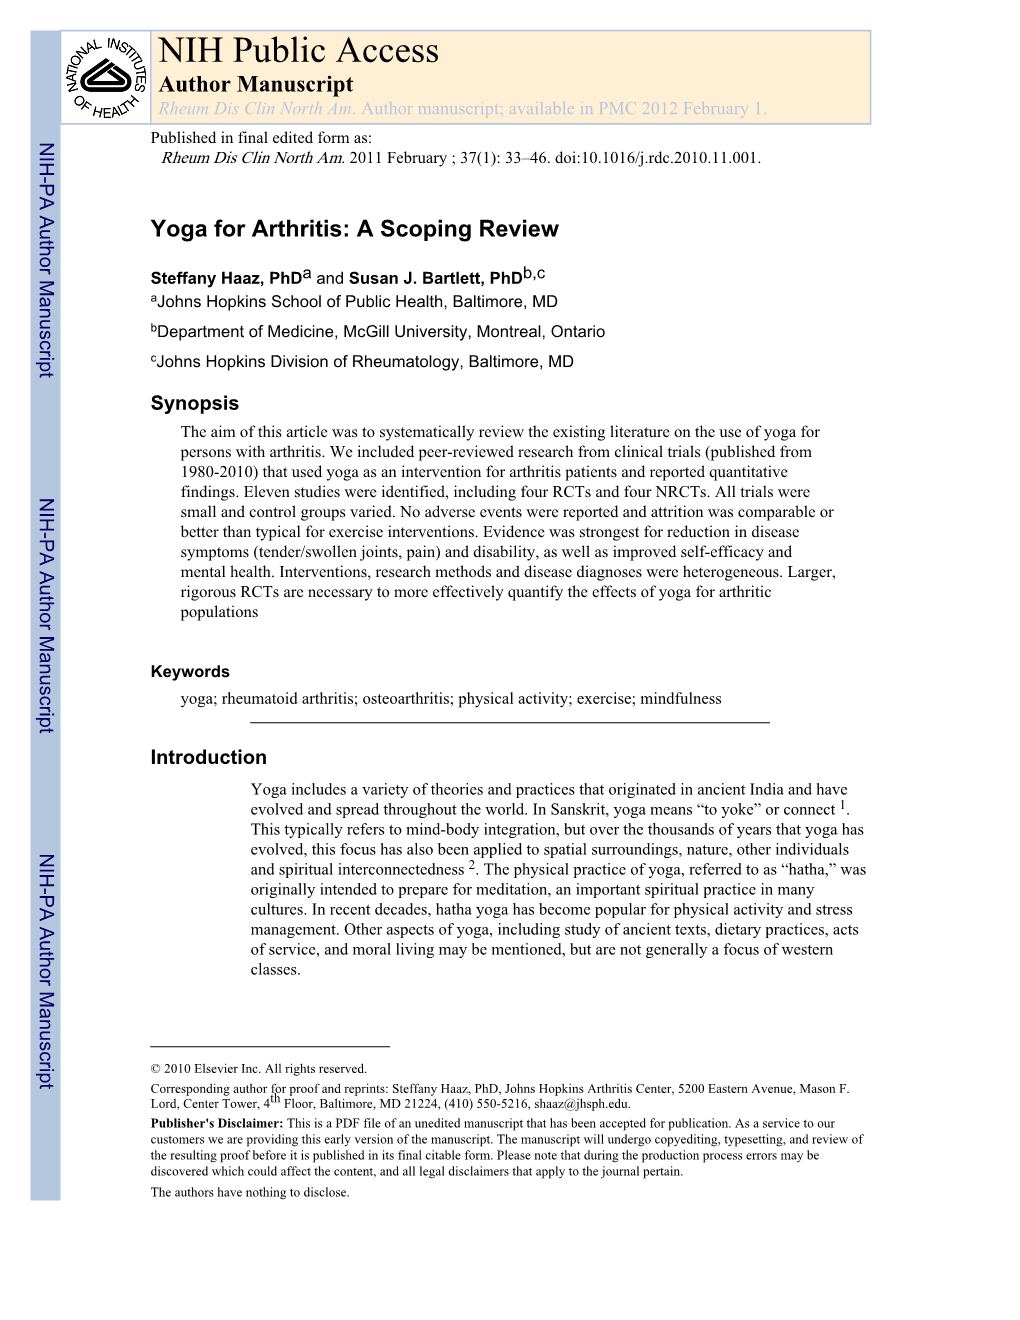 A Literature Review of Yoga for Arthritis